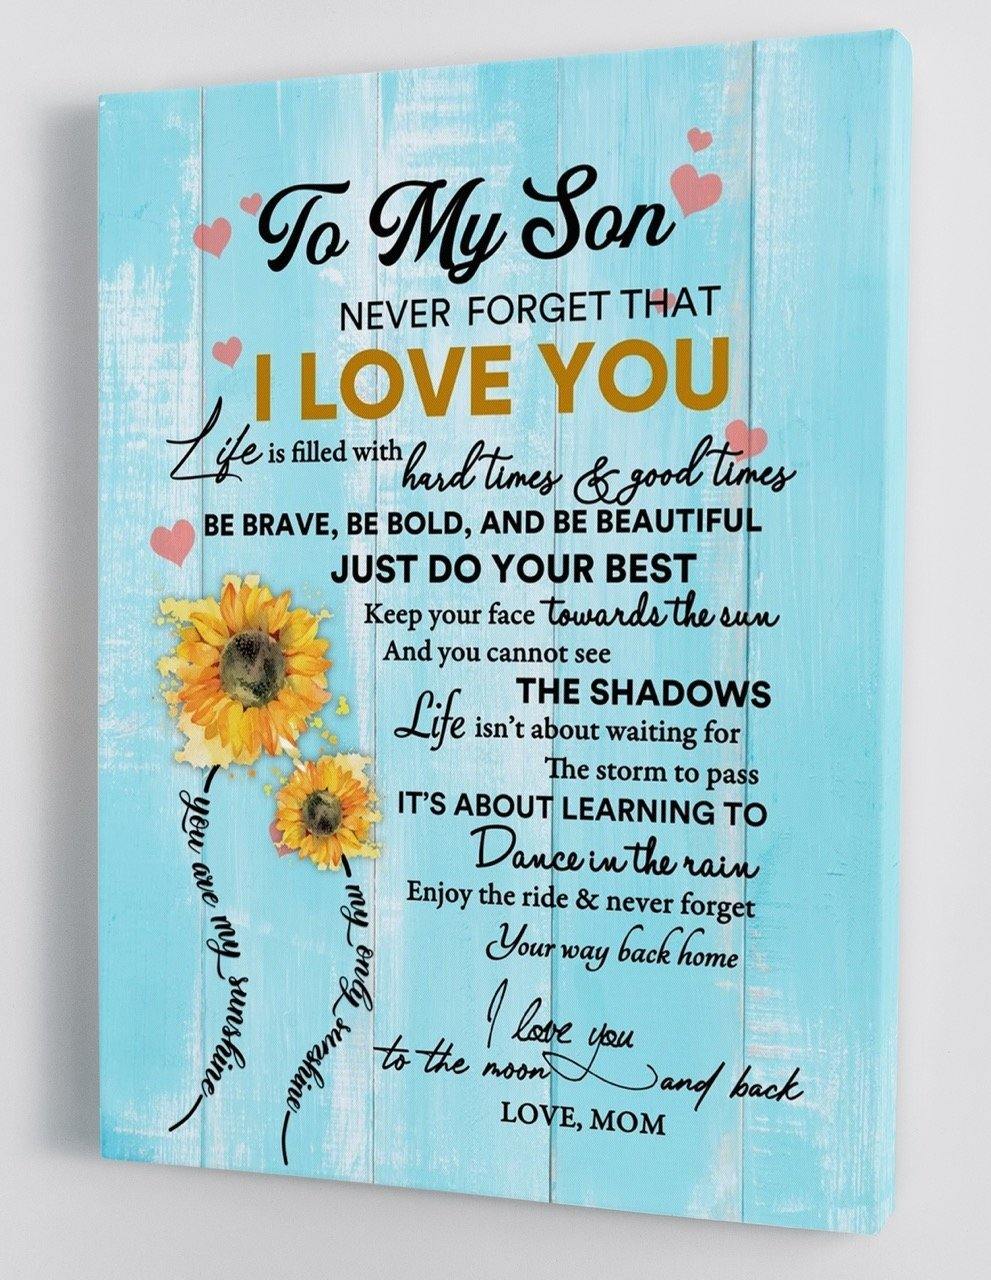 To My Son - From Mom - Framed Canvas Gift MS013 - DivesArt LLC